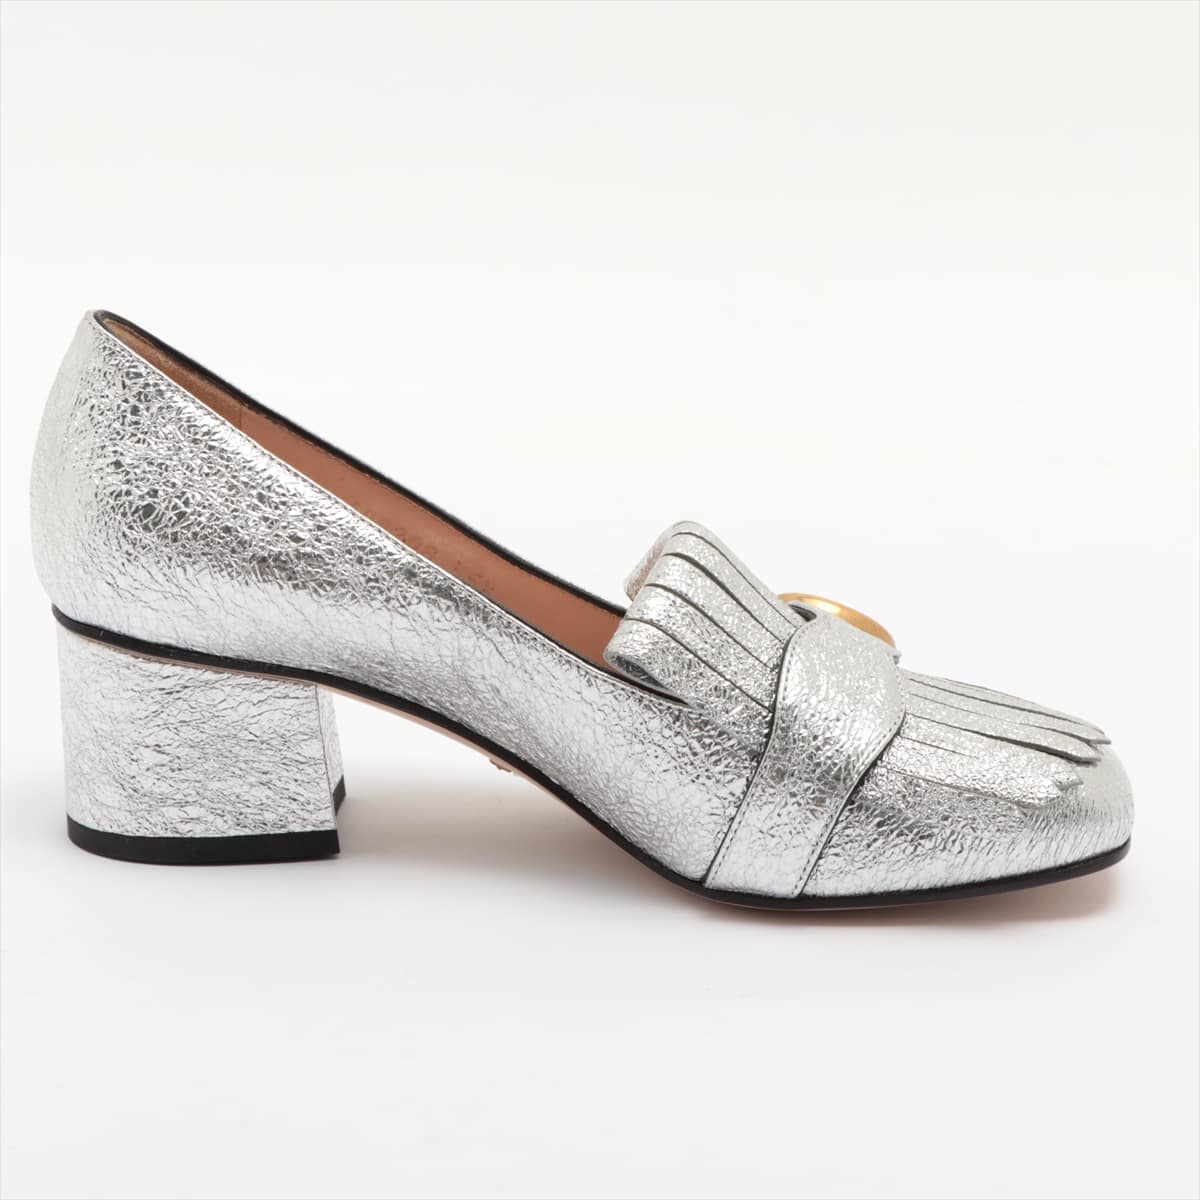 Gucci GG Marmont Metallic Leather Loafer 35.5 Ladies' Silver Quilted loafers